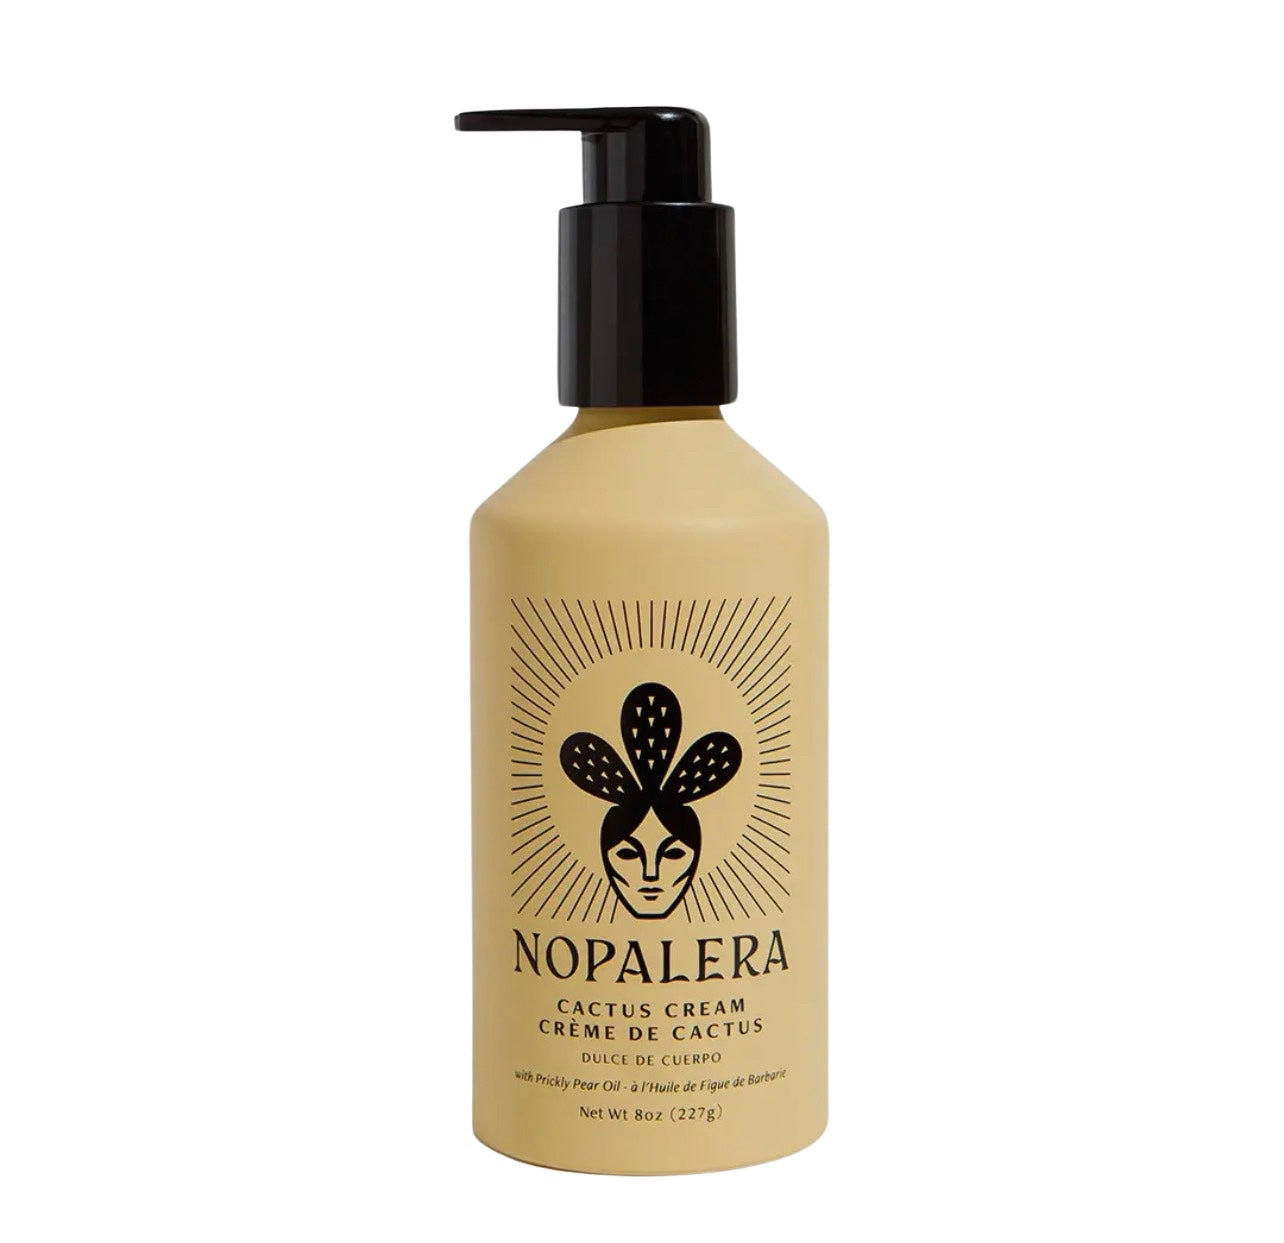 8 oz bottle of cactus cream featuring a beige colored bottle with the signature Nopalera logo of a women wearing a cactus crown